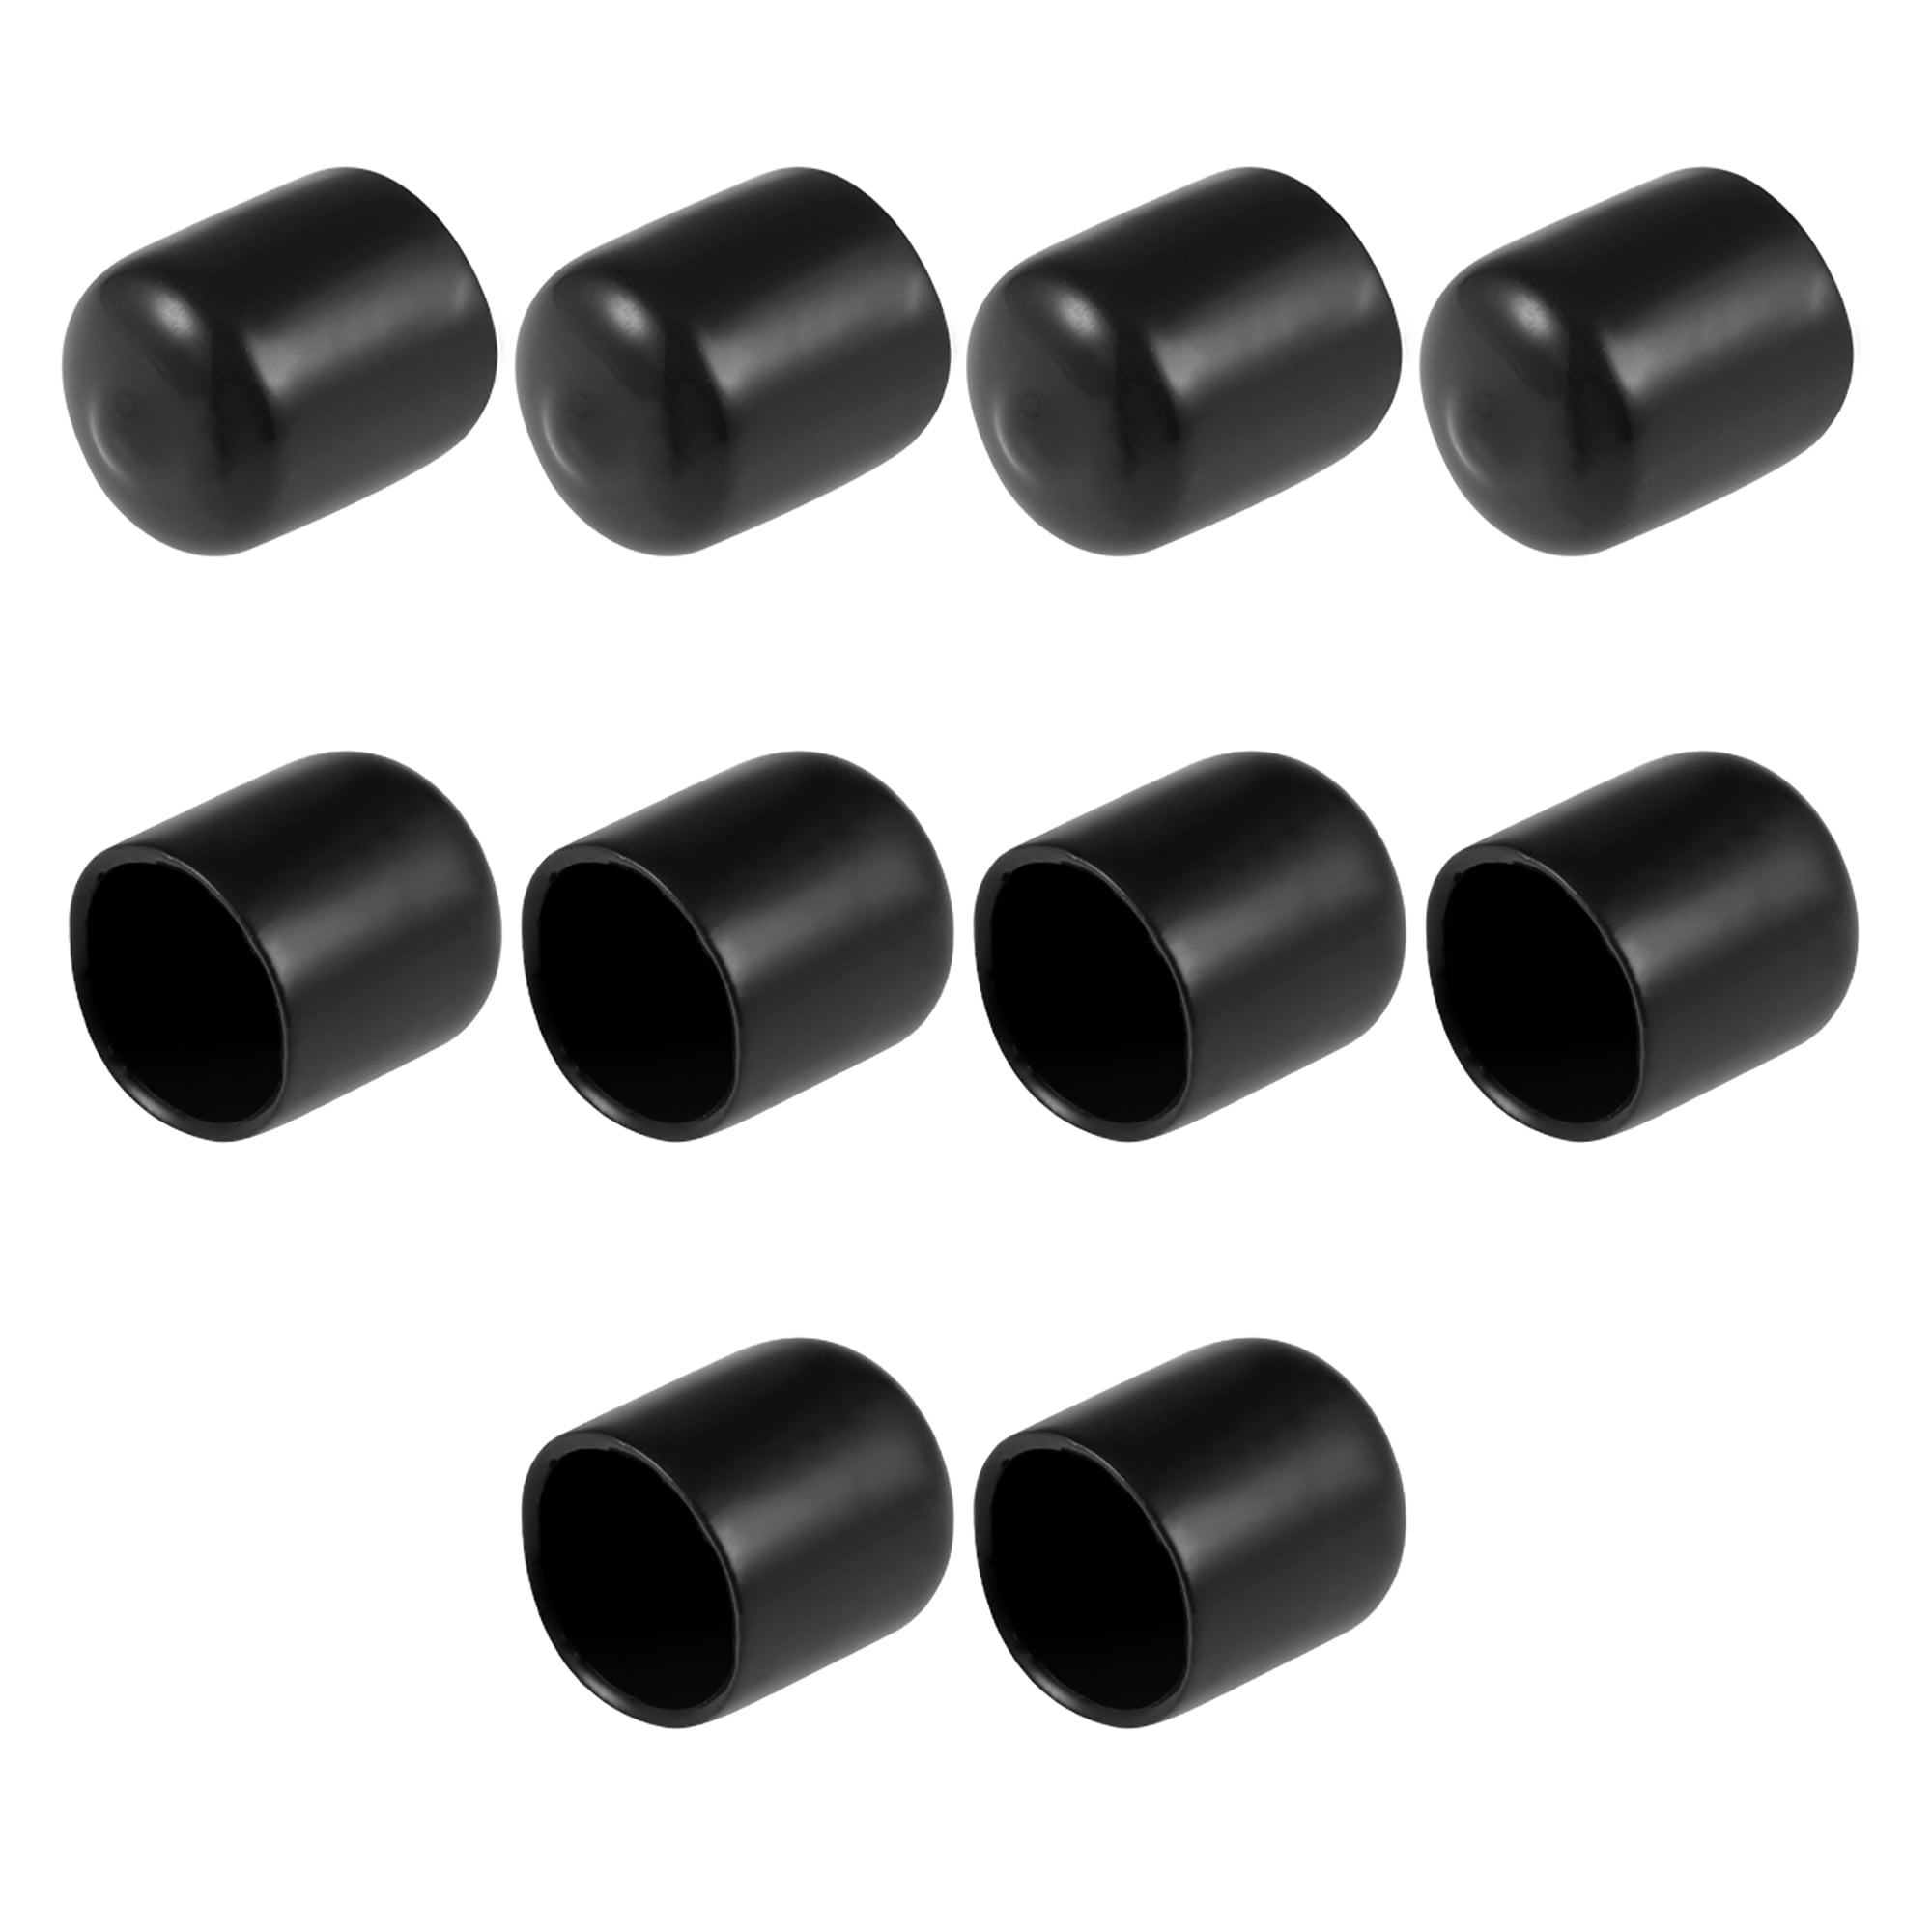 30mm x 15mm Flat Sided Oval Plastic End Caps Insert Plugs Steel Box Section x 4 